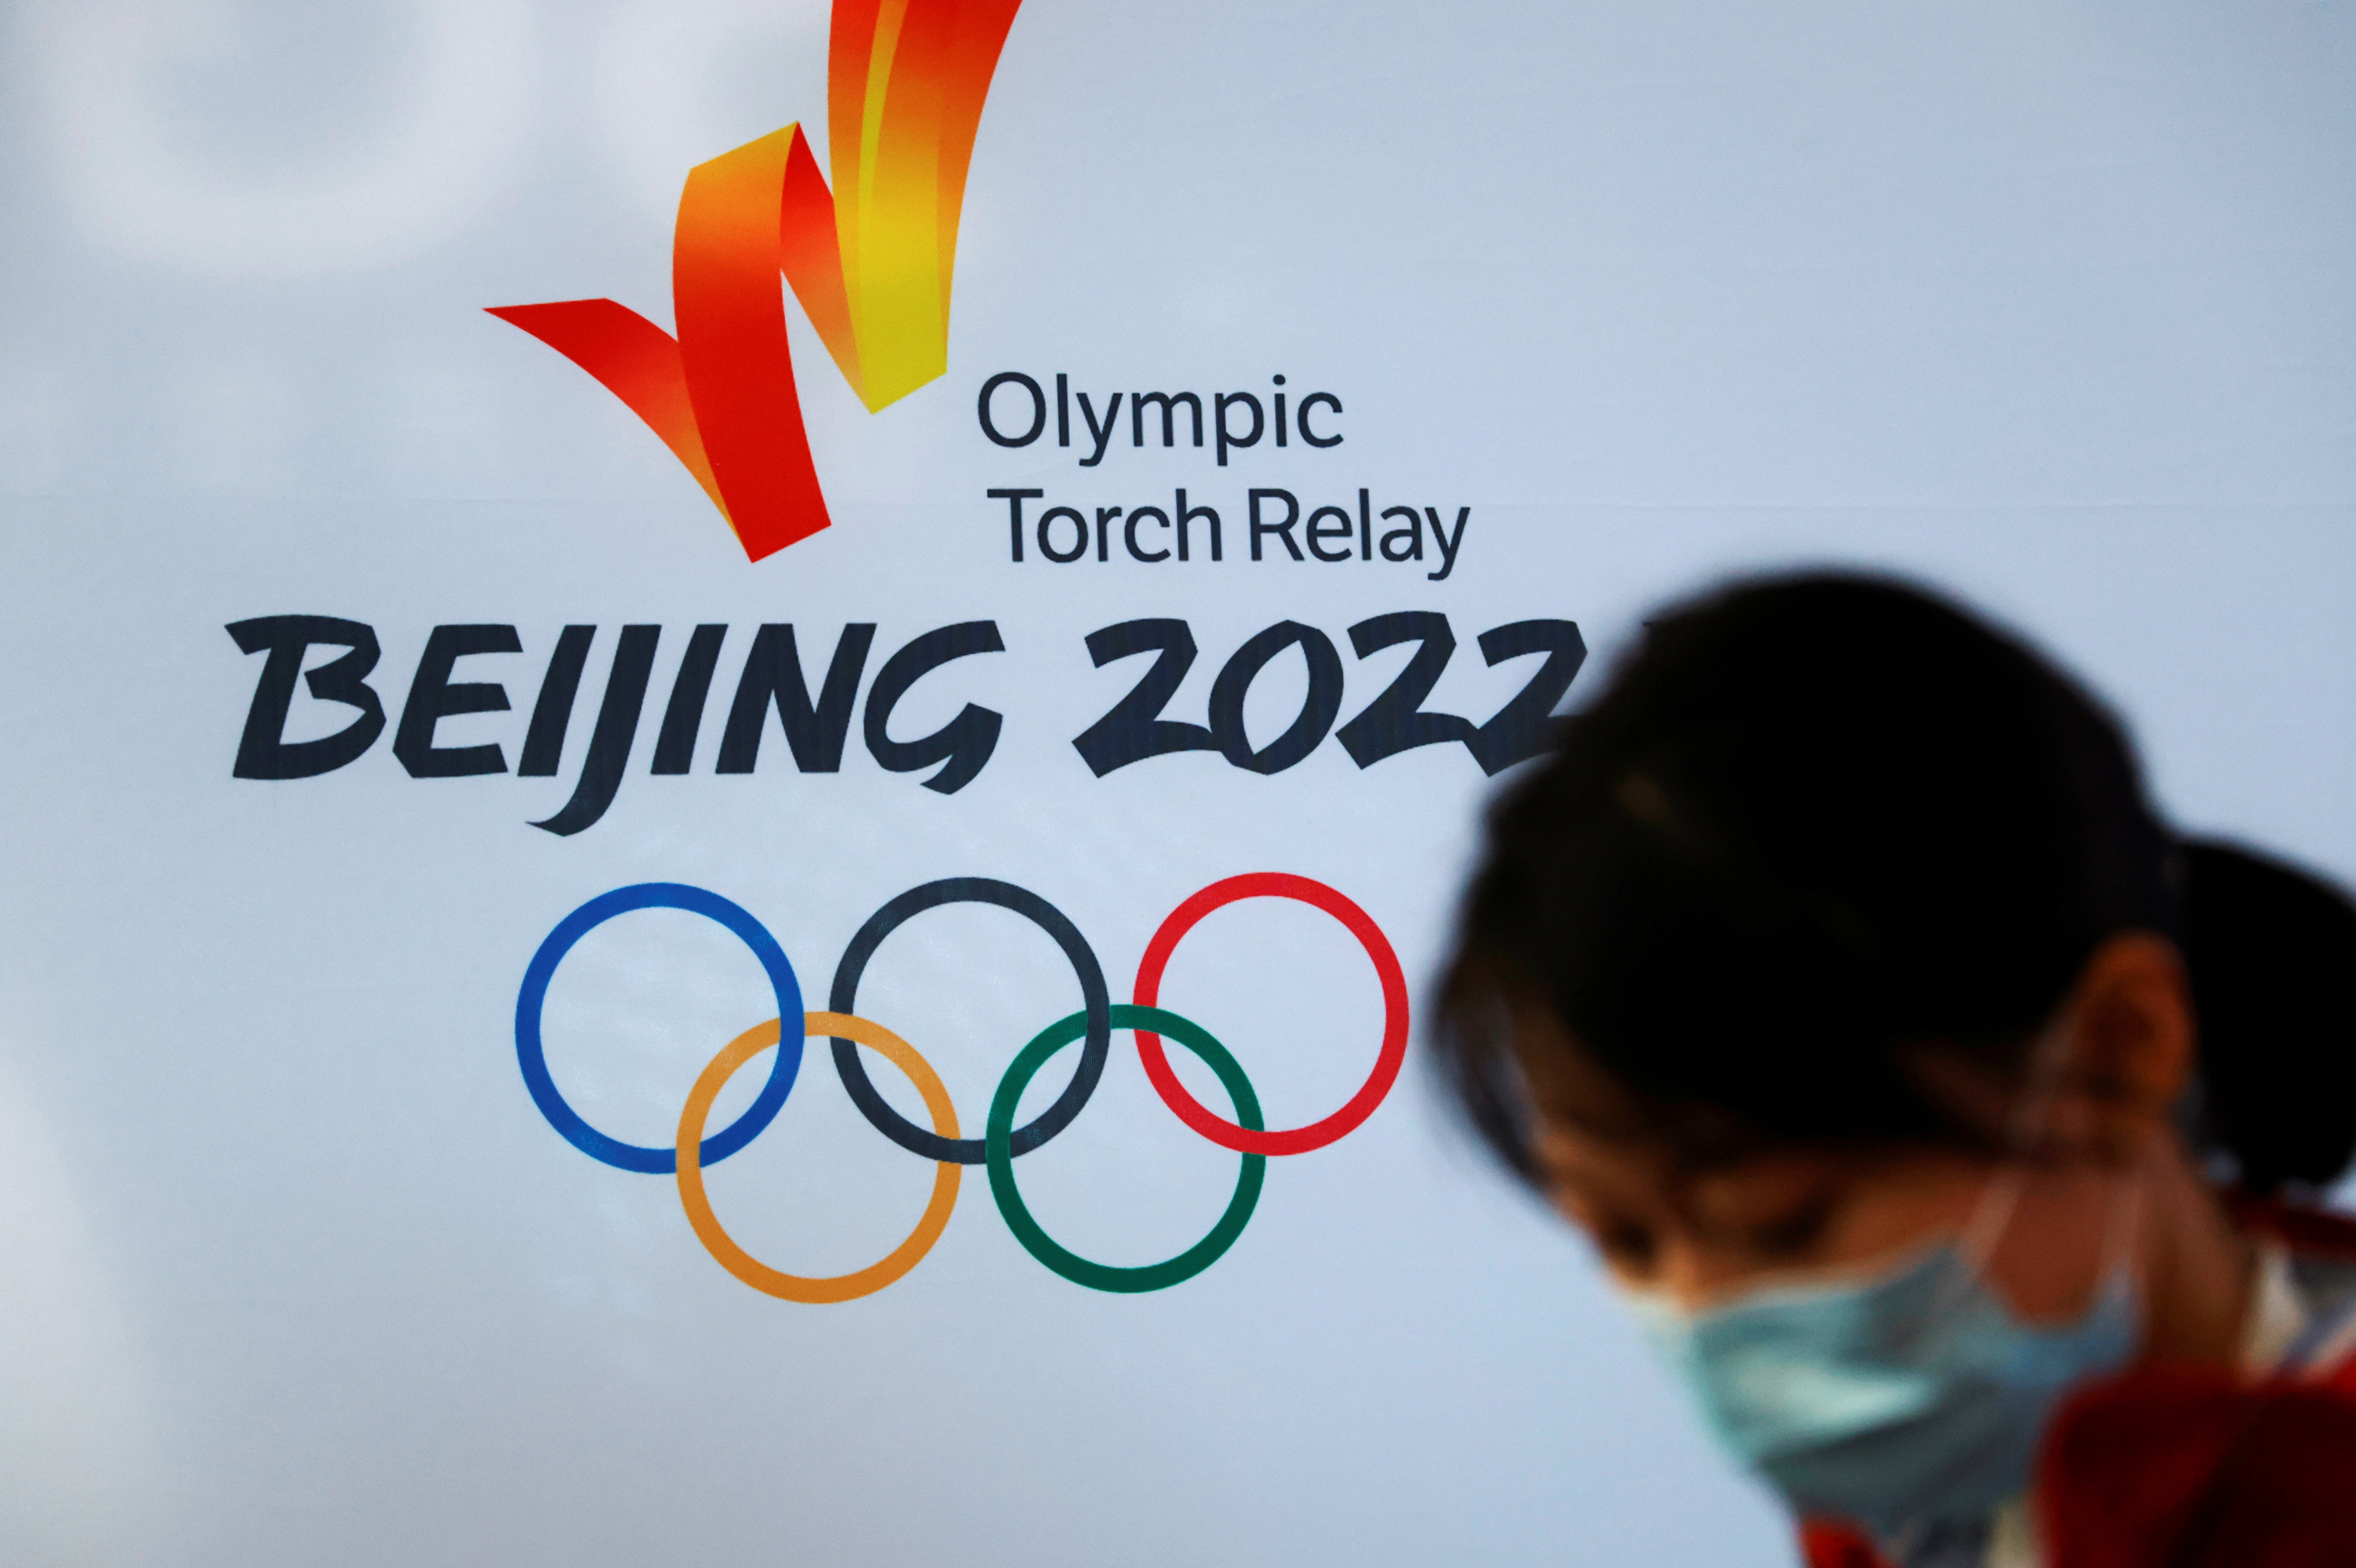 A woman wearing a face mask stands in front of the logo of the Beijing 2022 Winter Olympics before the Olympics flame exhibition tour at Beijing University of Posts and Telecommunications, in Beijing, China on 9 December 2021